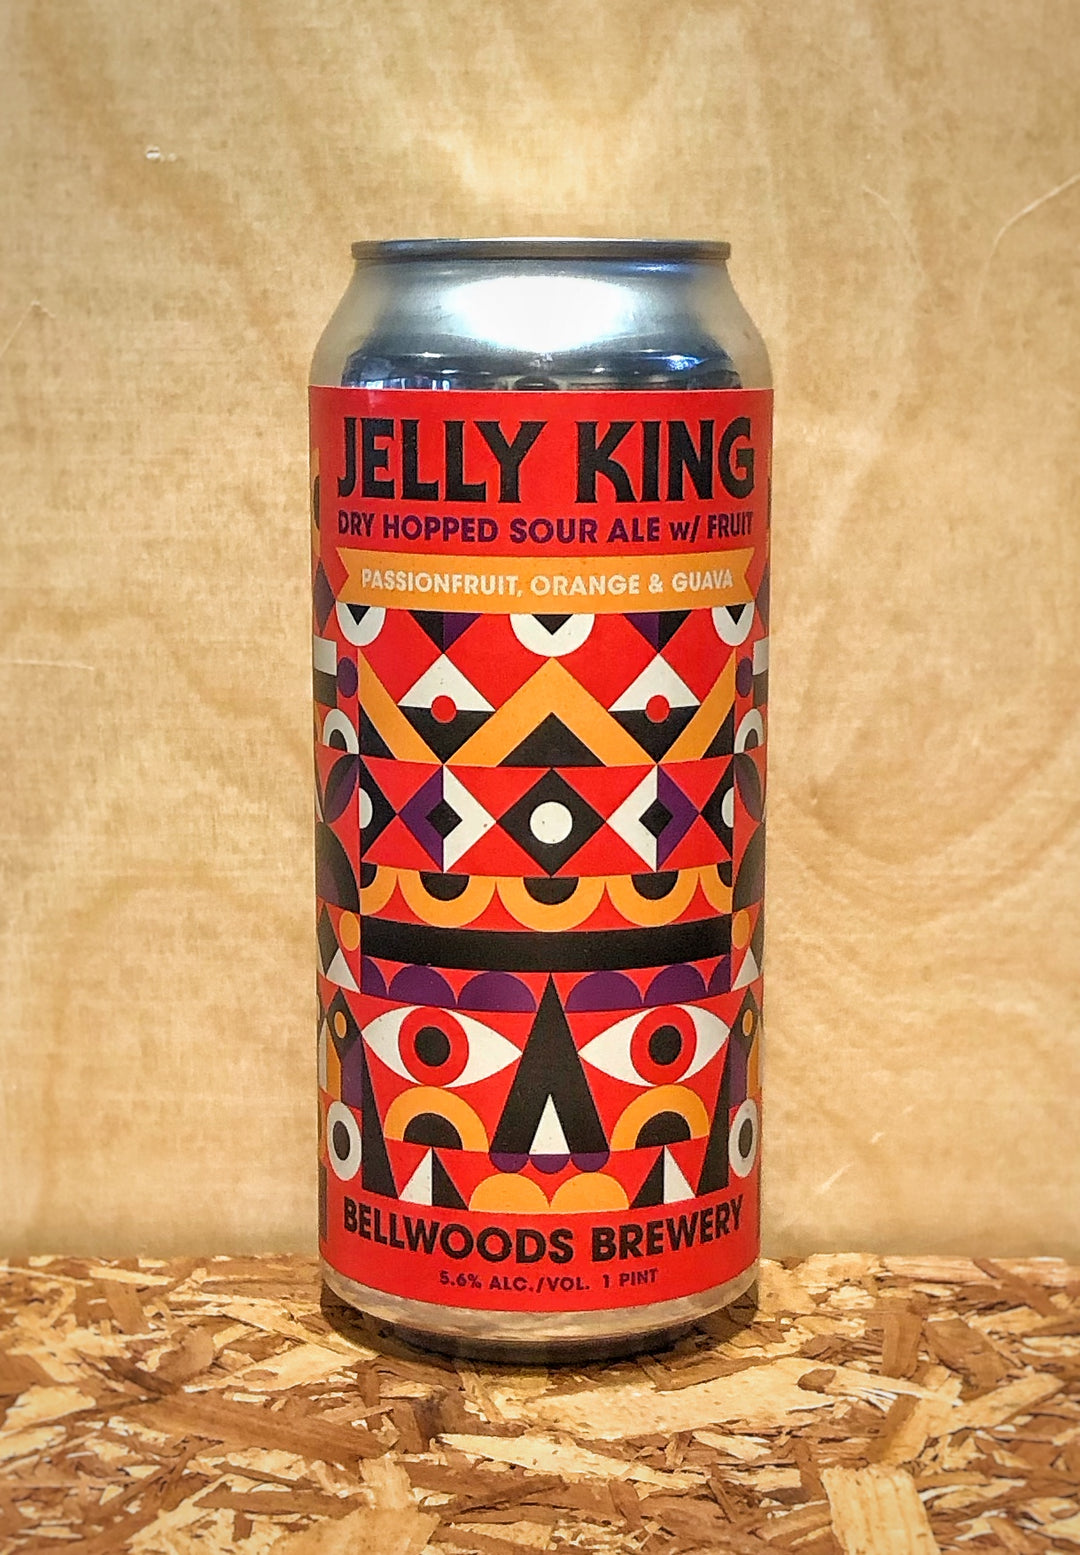 Bellwoods Brewery 'Jelly King' Dry Hopped Sour Ale with Passionfruit, Orange, Guava (Toronto Ontario)